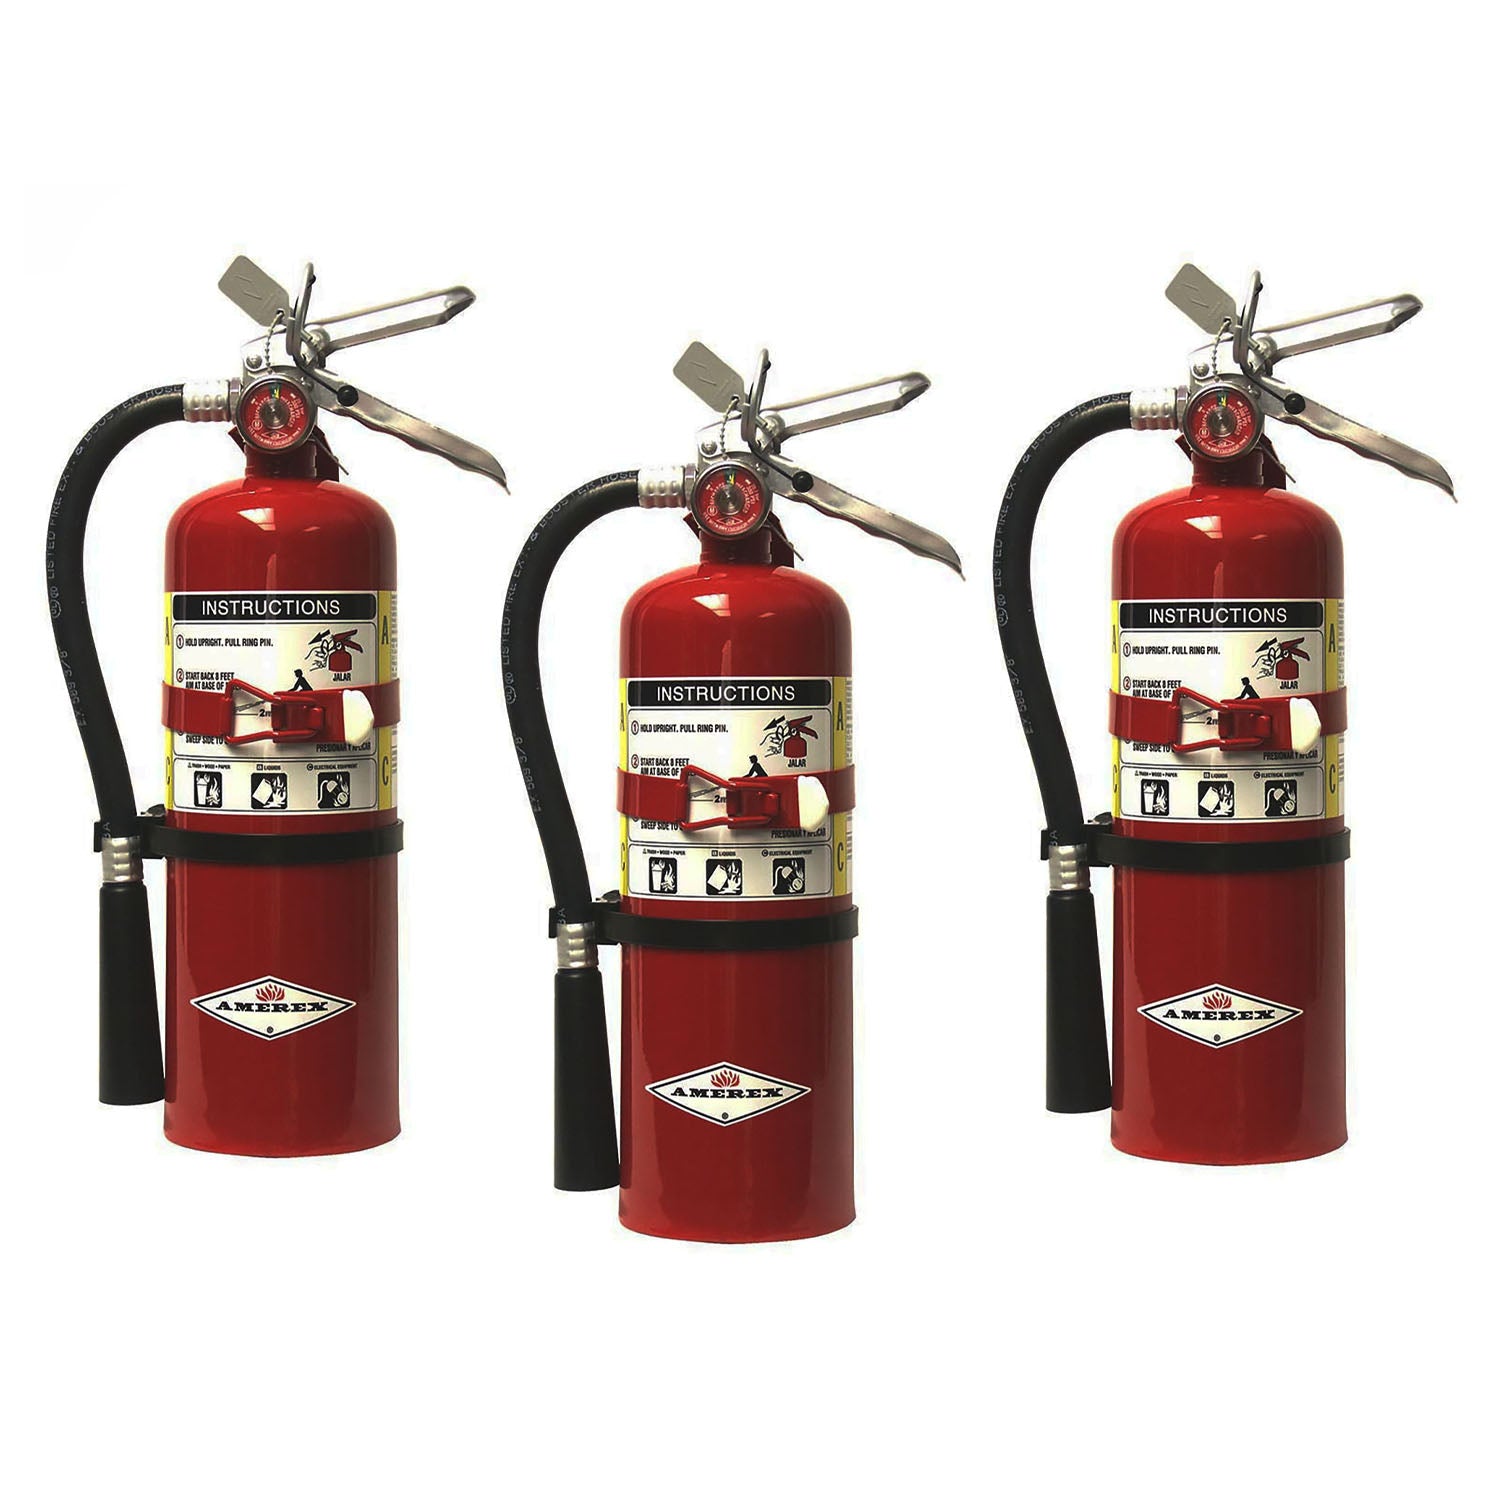 Amerex B500T ABC Dry Chemical Fire Extinguisher with Aluminum Valve and Bracket - 3 Pack - Pro-Distributing